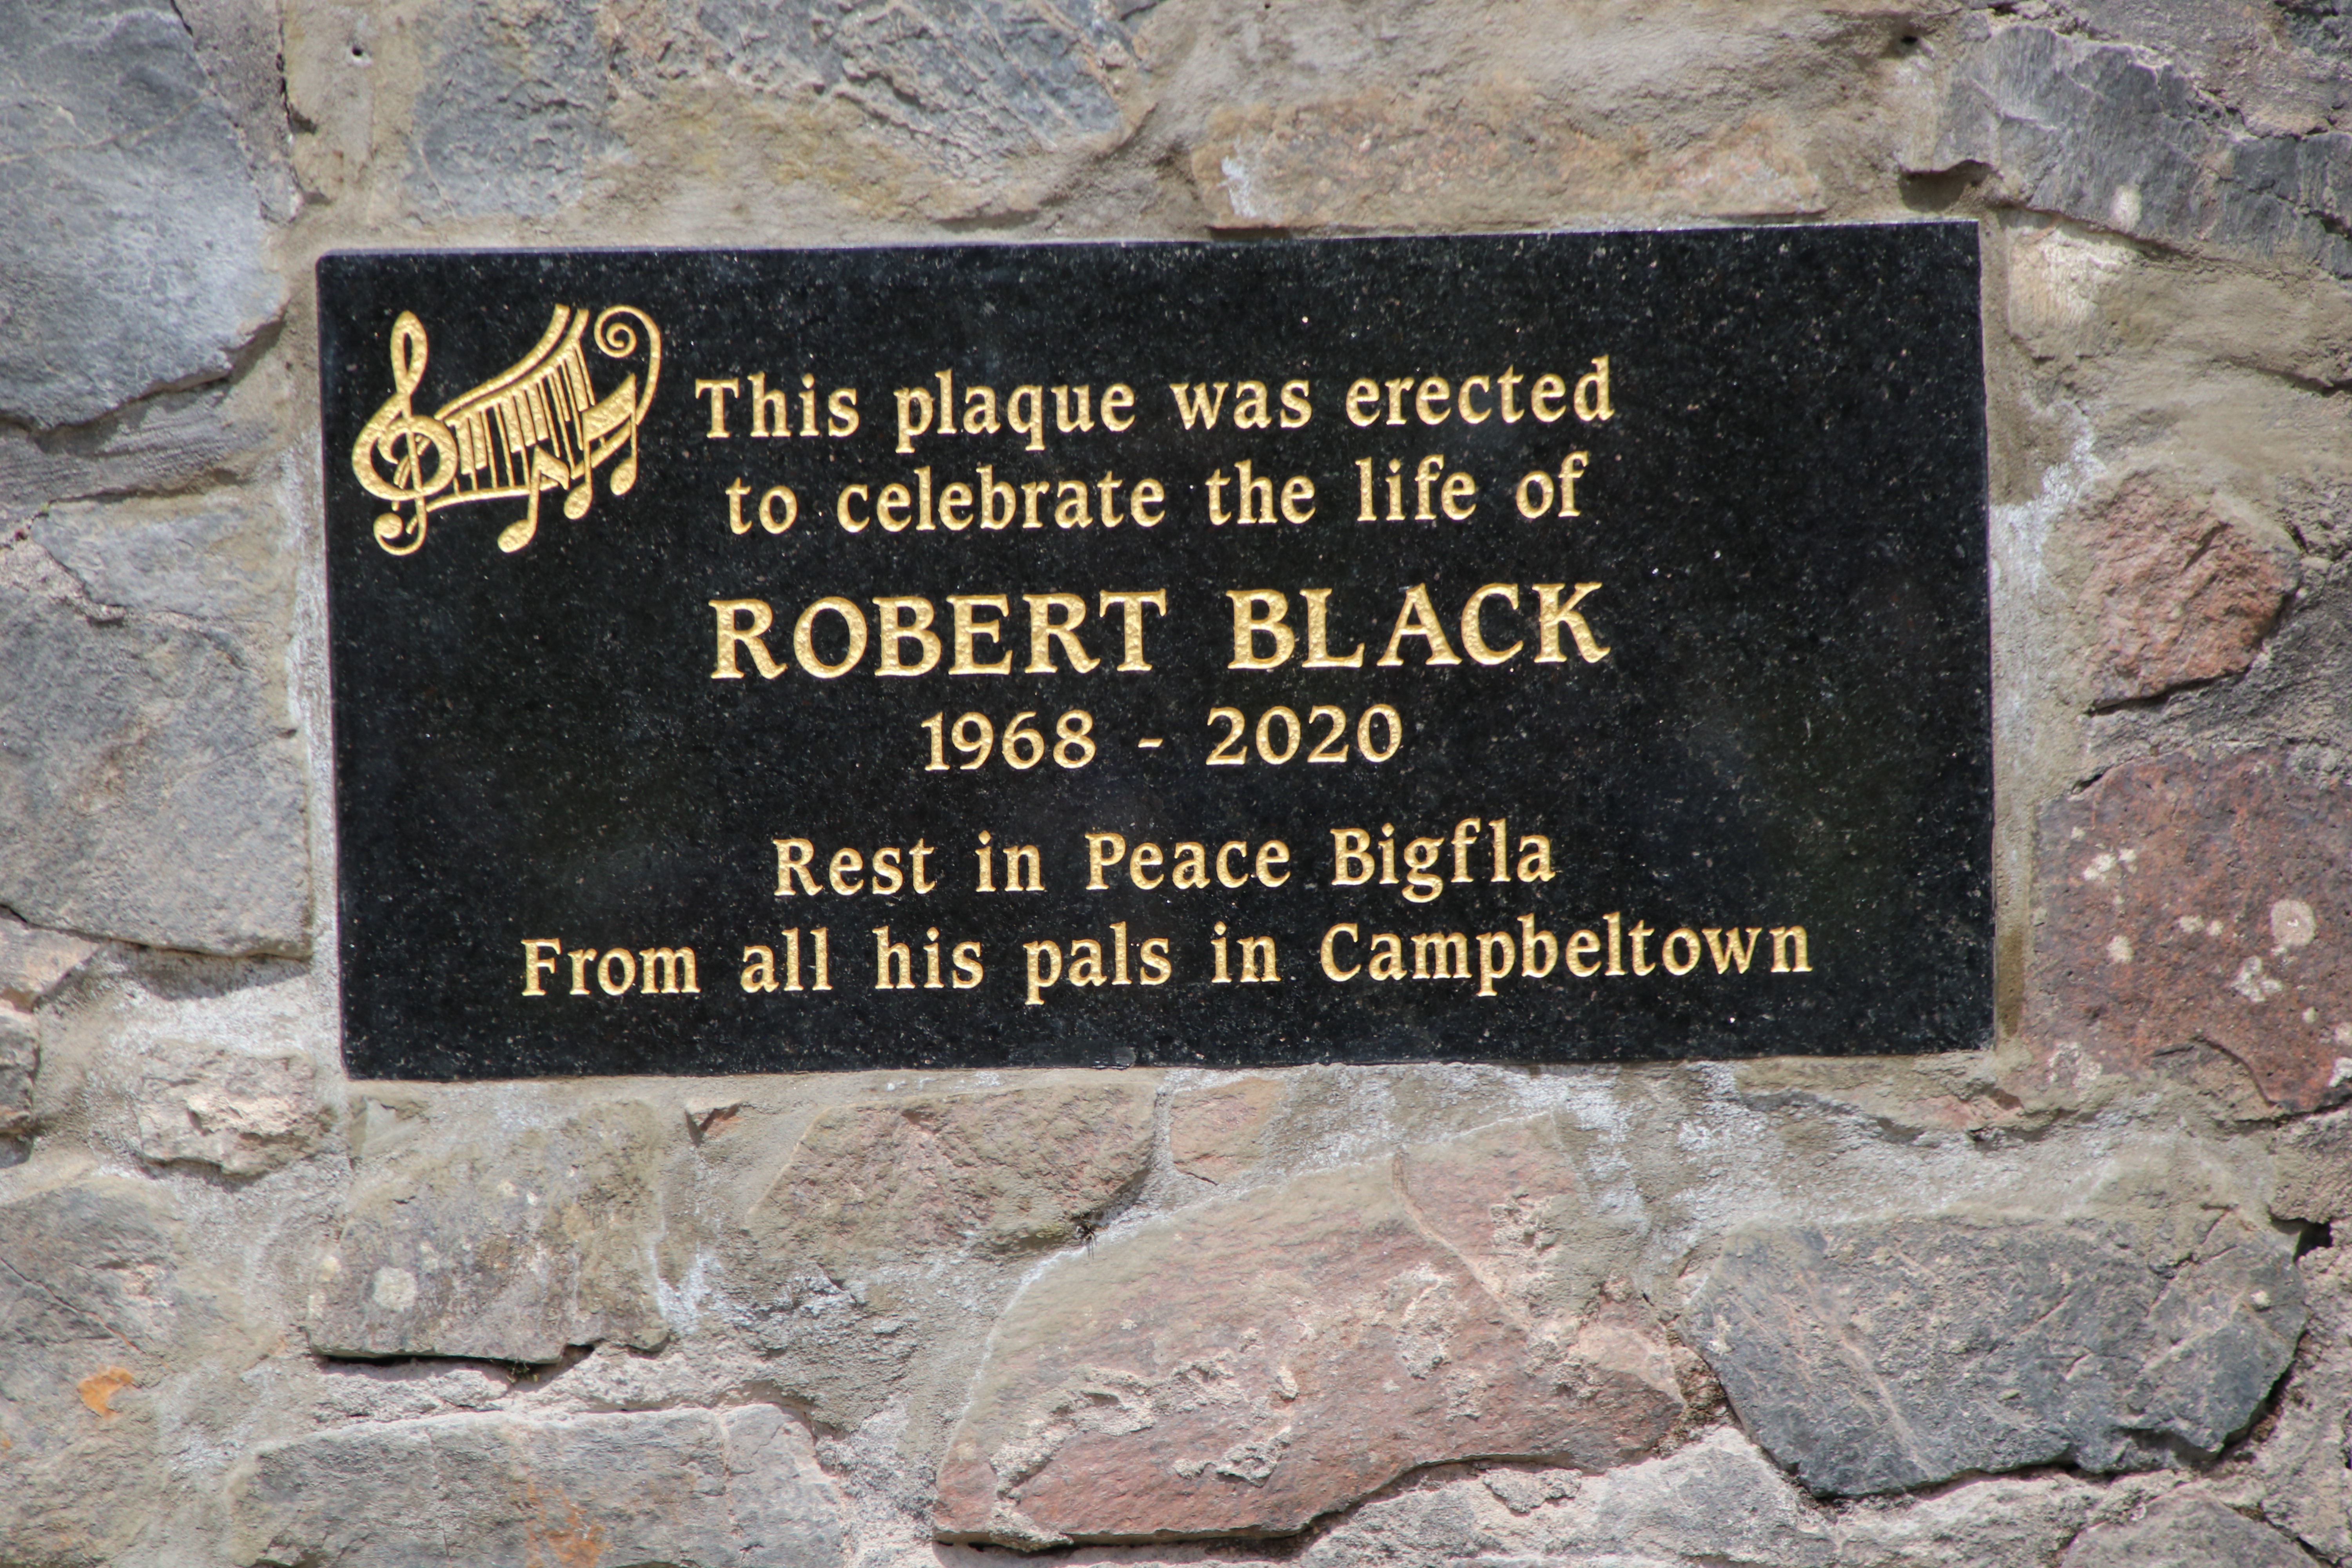 A memorial bench and plaque has also been placed at the site for people to remember Robert Black